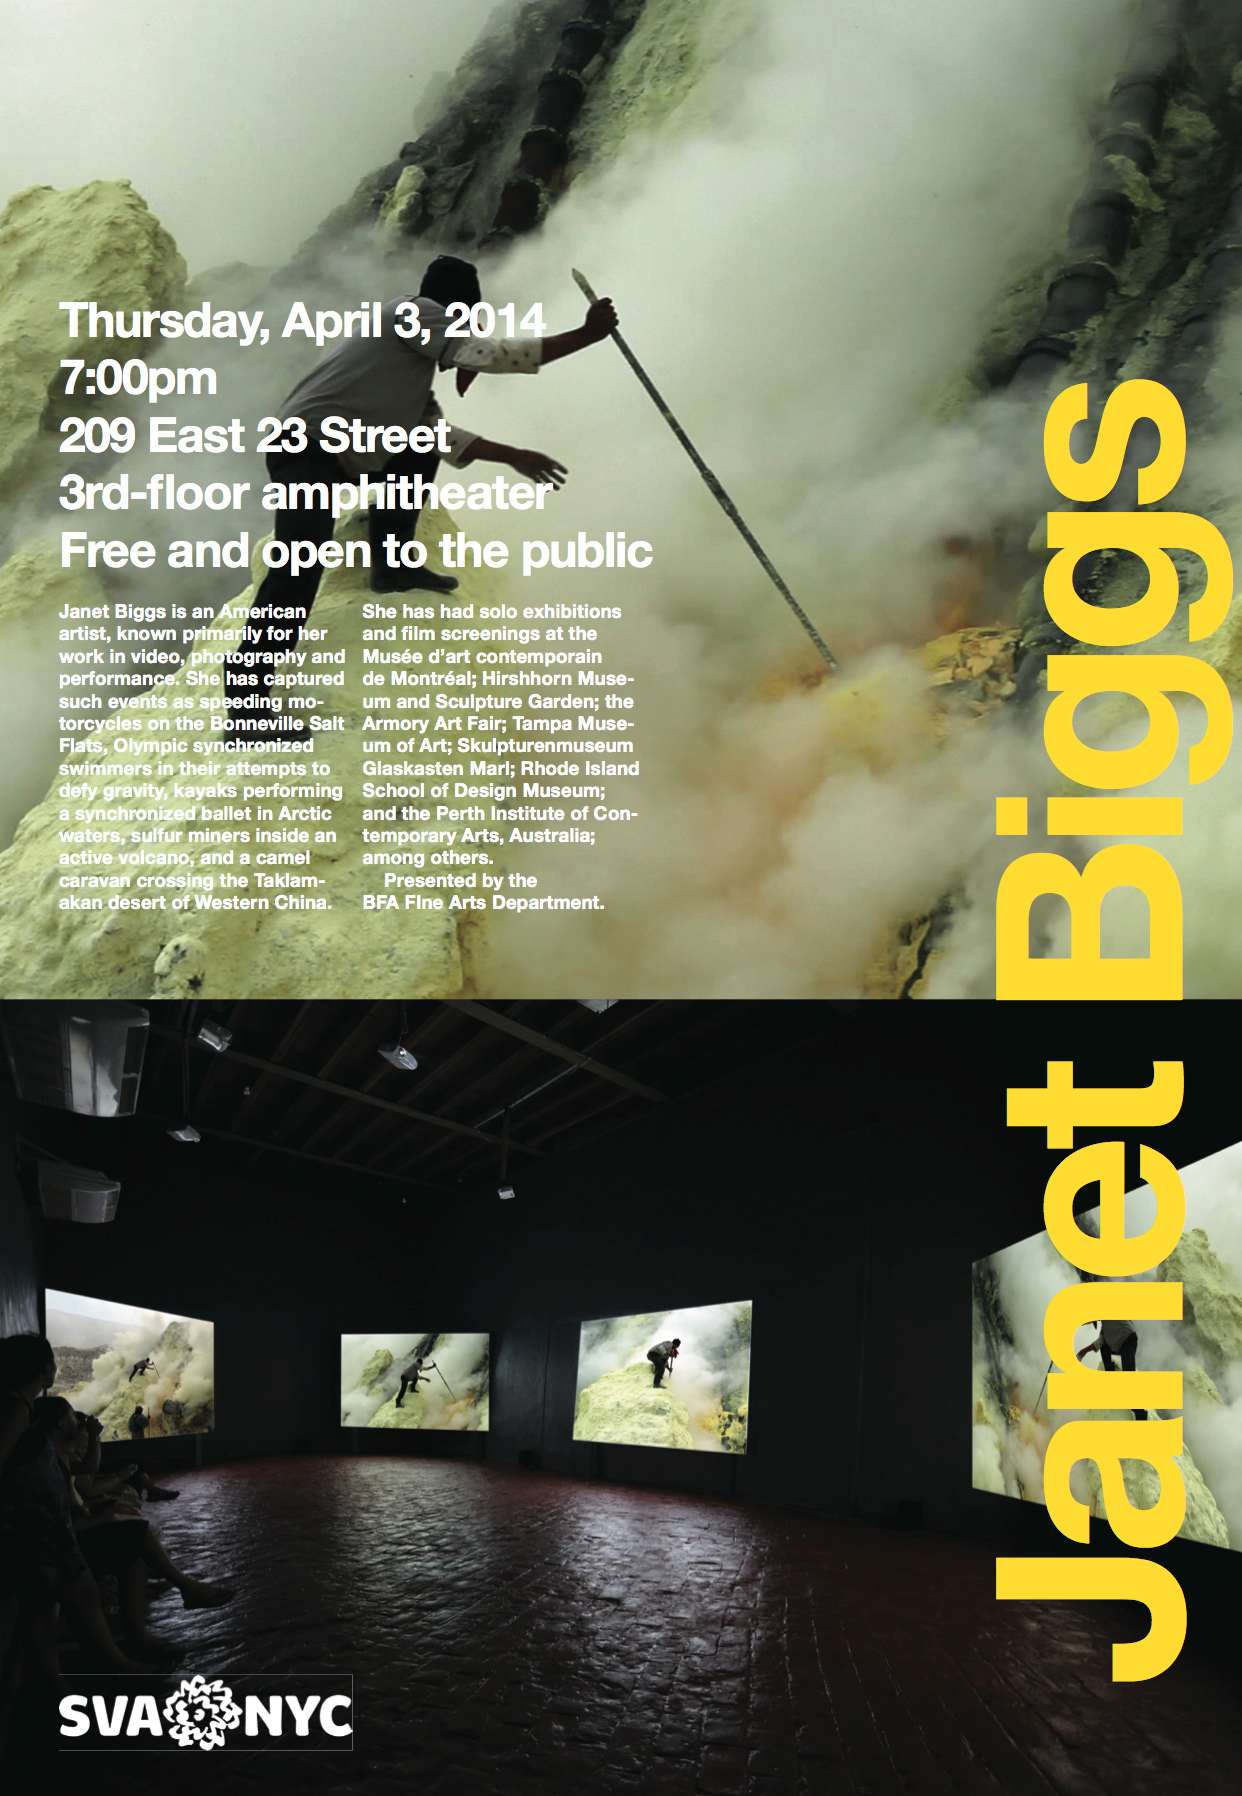 An advertisement for Janet Biggs at 209 East 23 Street, 3rd-floor amphitheater, on Thursday, April 3, 2014 at 7:00pm. The poster is split with an image of a man climbing rocks on the top half and on the bottom half is a dark room with screens with images of the man climbing rocks